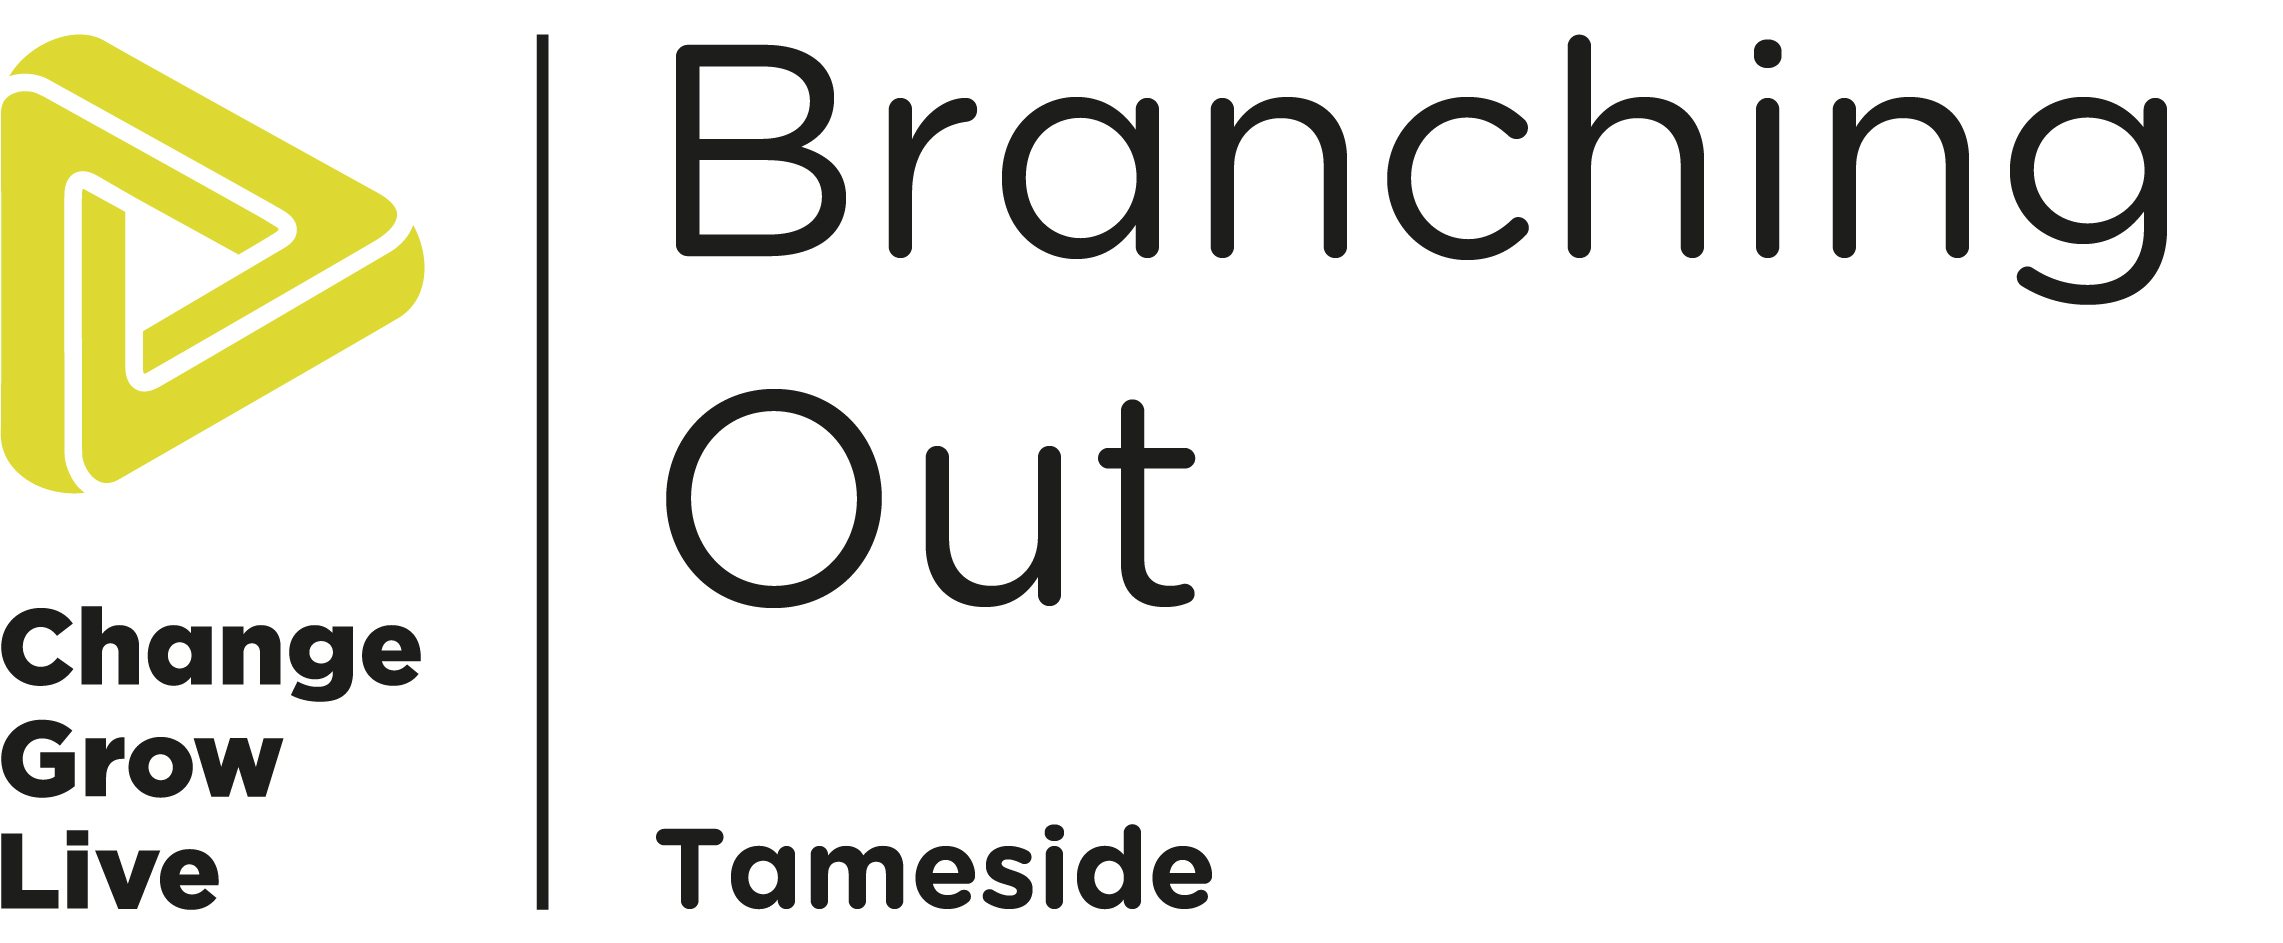 The Branching Out Logo in black